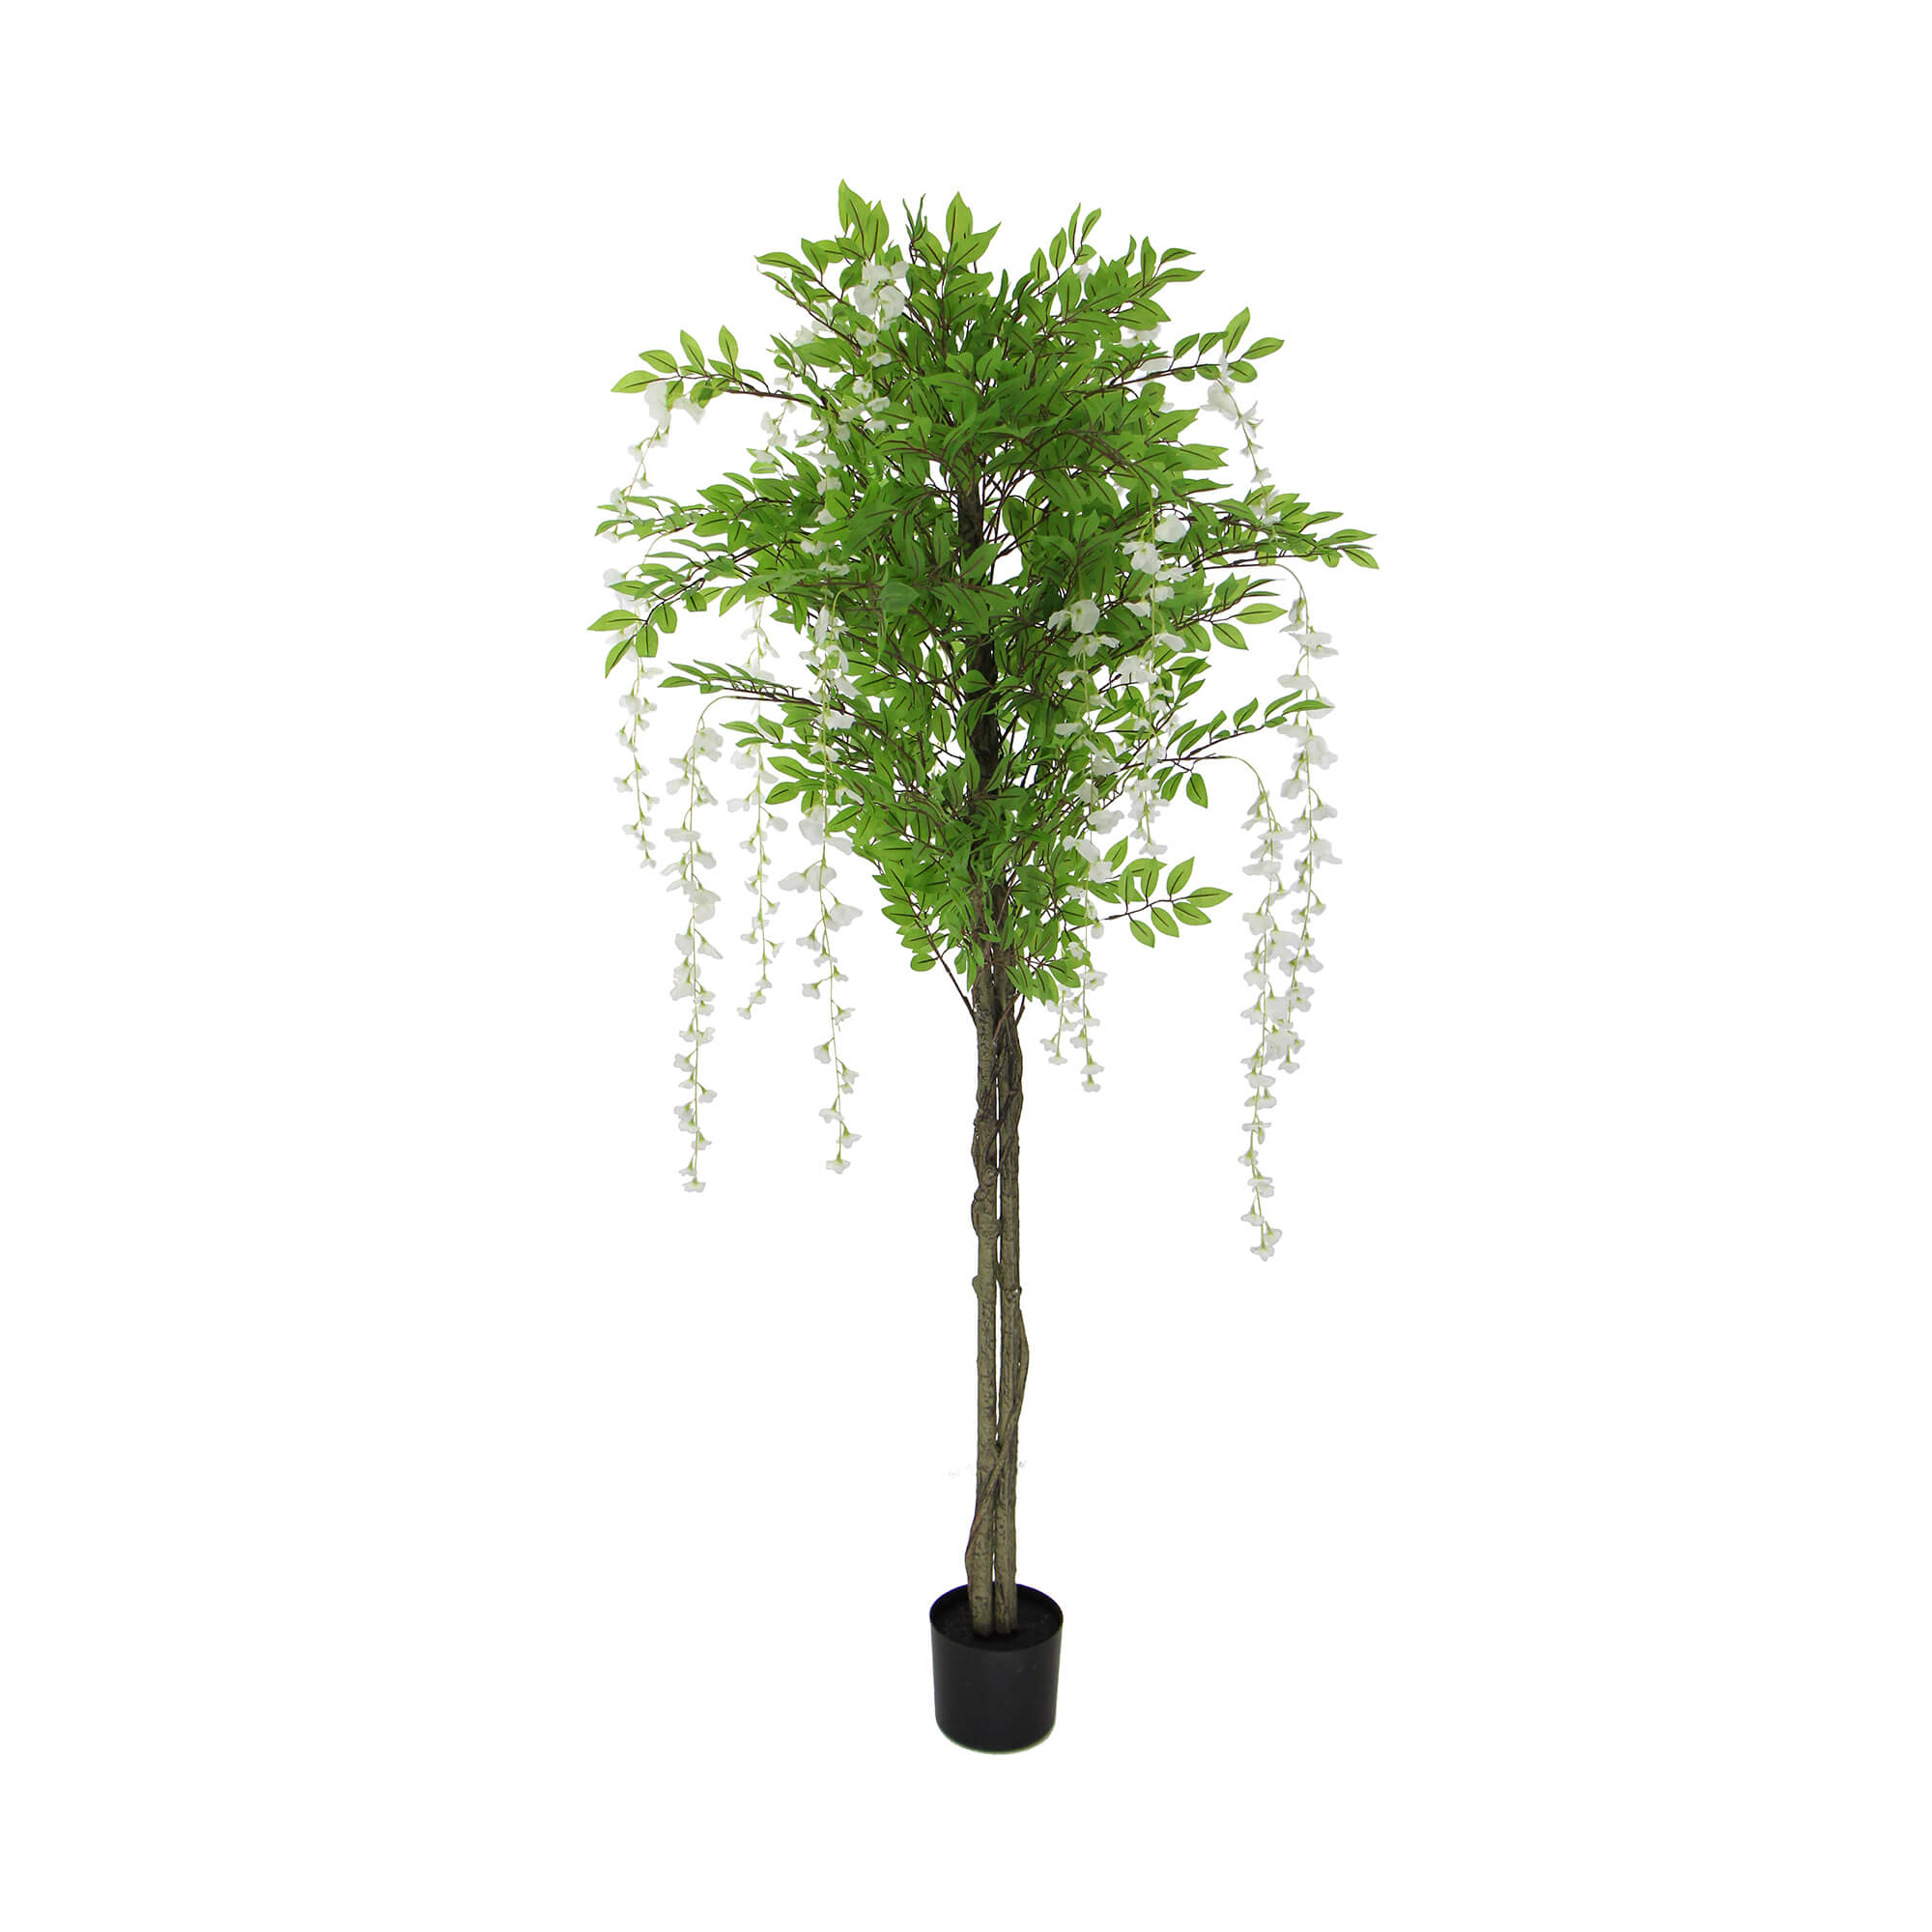 Flowering Artificial Wisteria With White Flowers 180cm - Designer Vertical Gardens Artificial tree Artificial Trees for Balconies